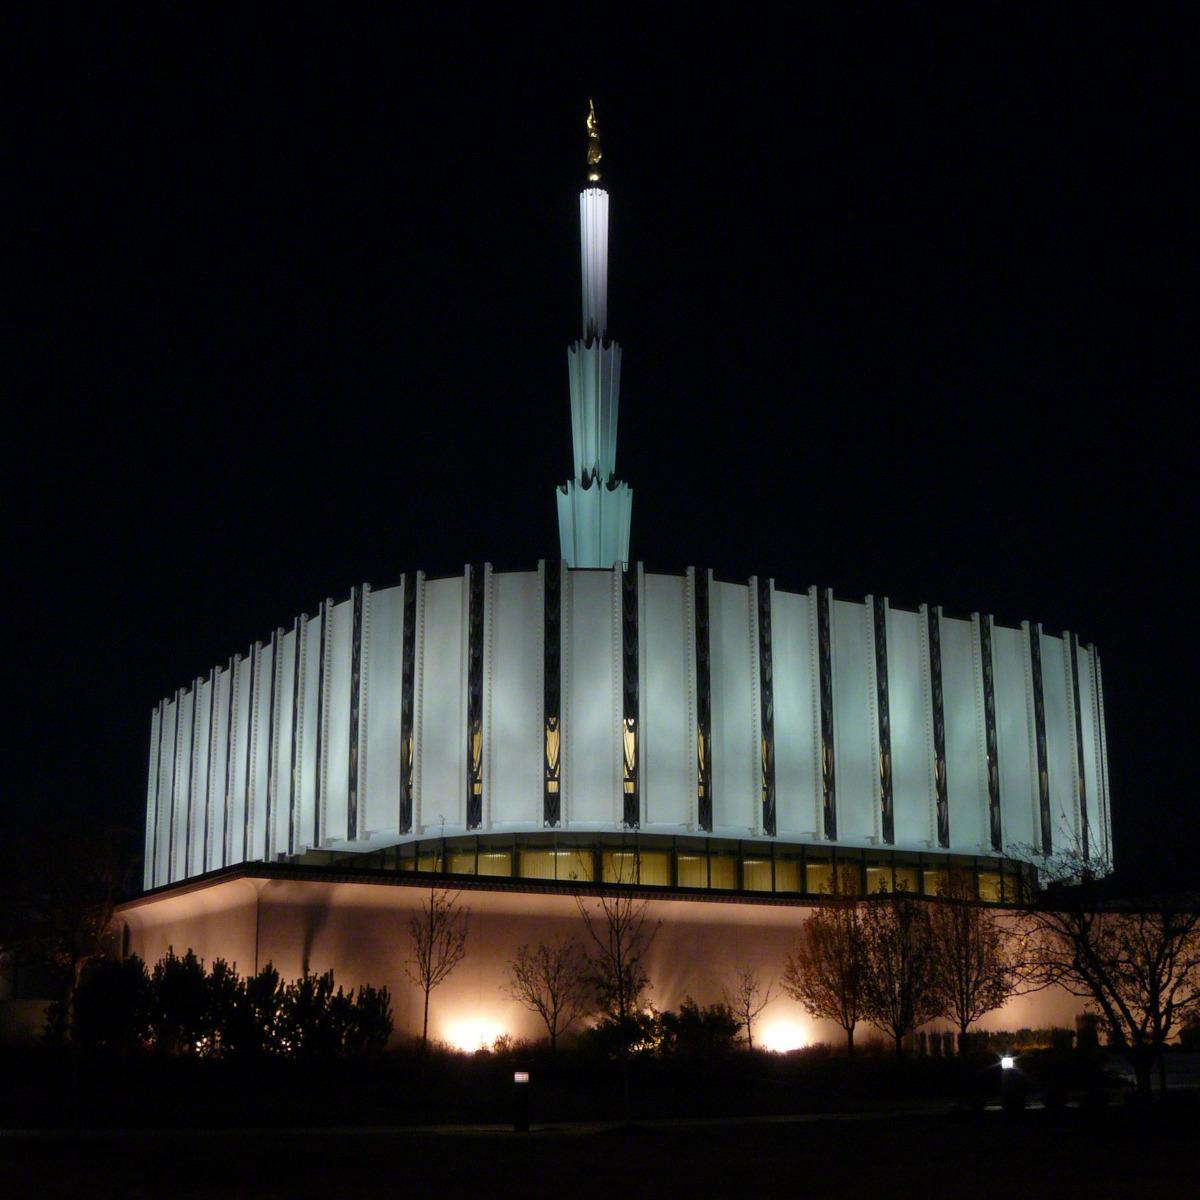 The exterior of the original Ogden Utah Temple, dedicated in 1972, that had a flat, round base with a spire in the center, at night.